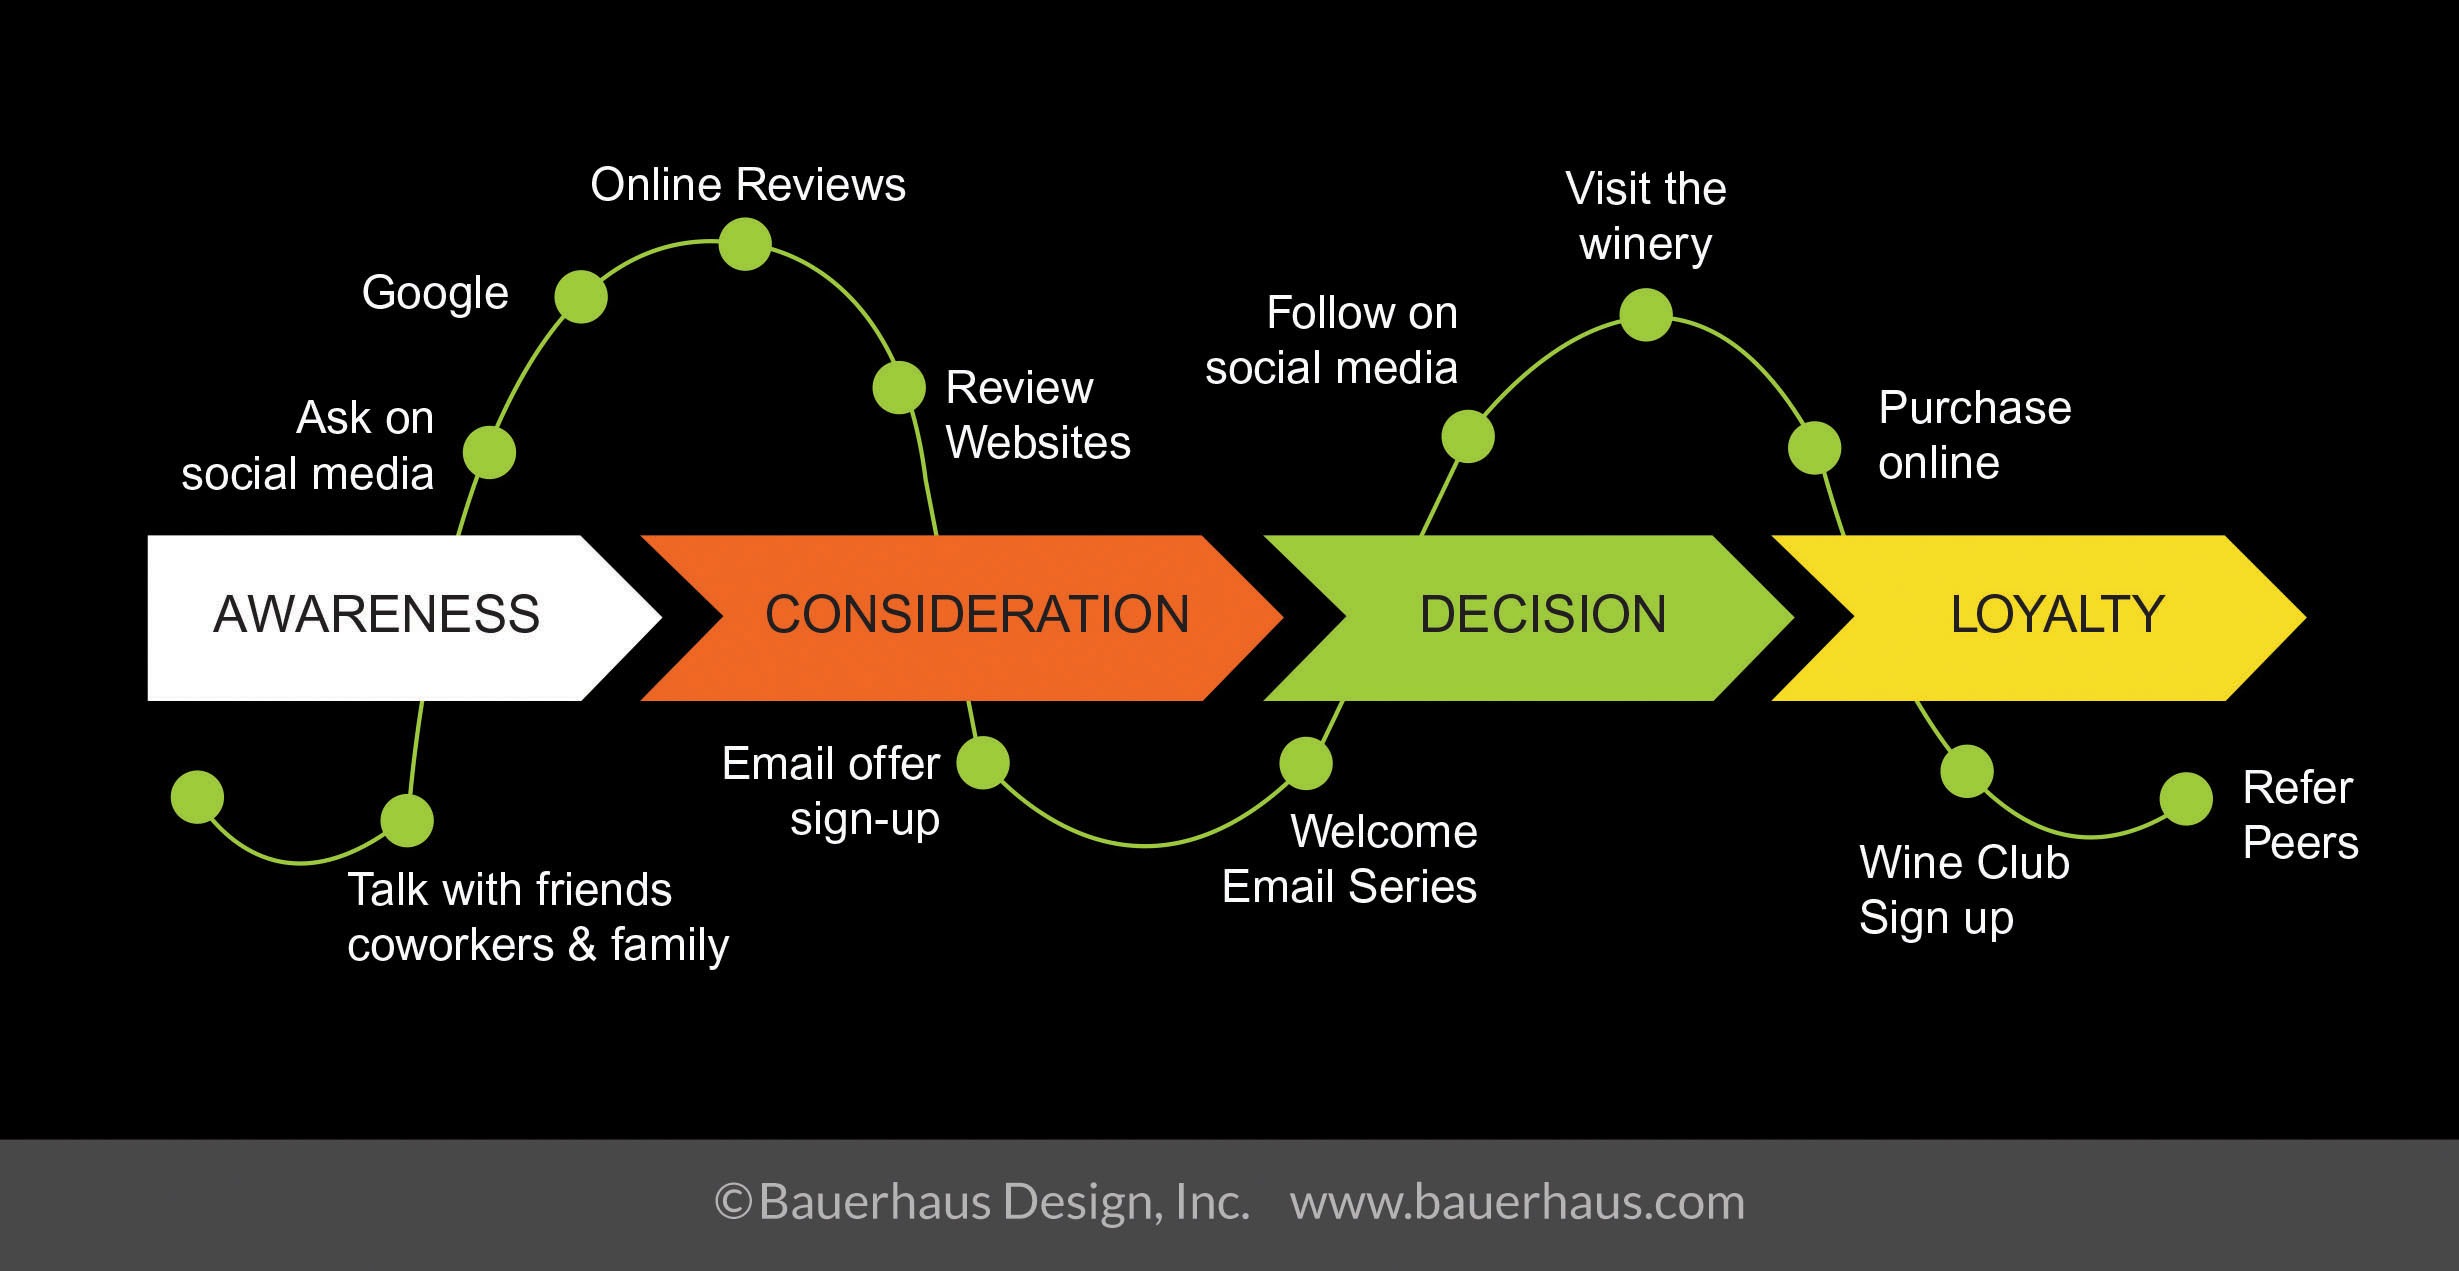 Understand the Concept of the Customer Journey